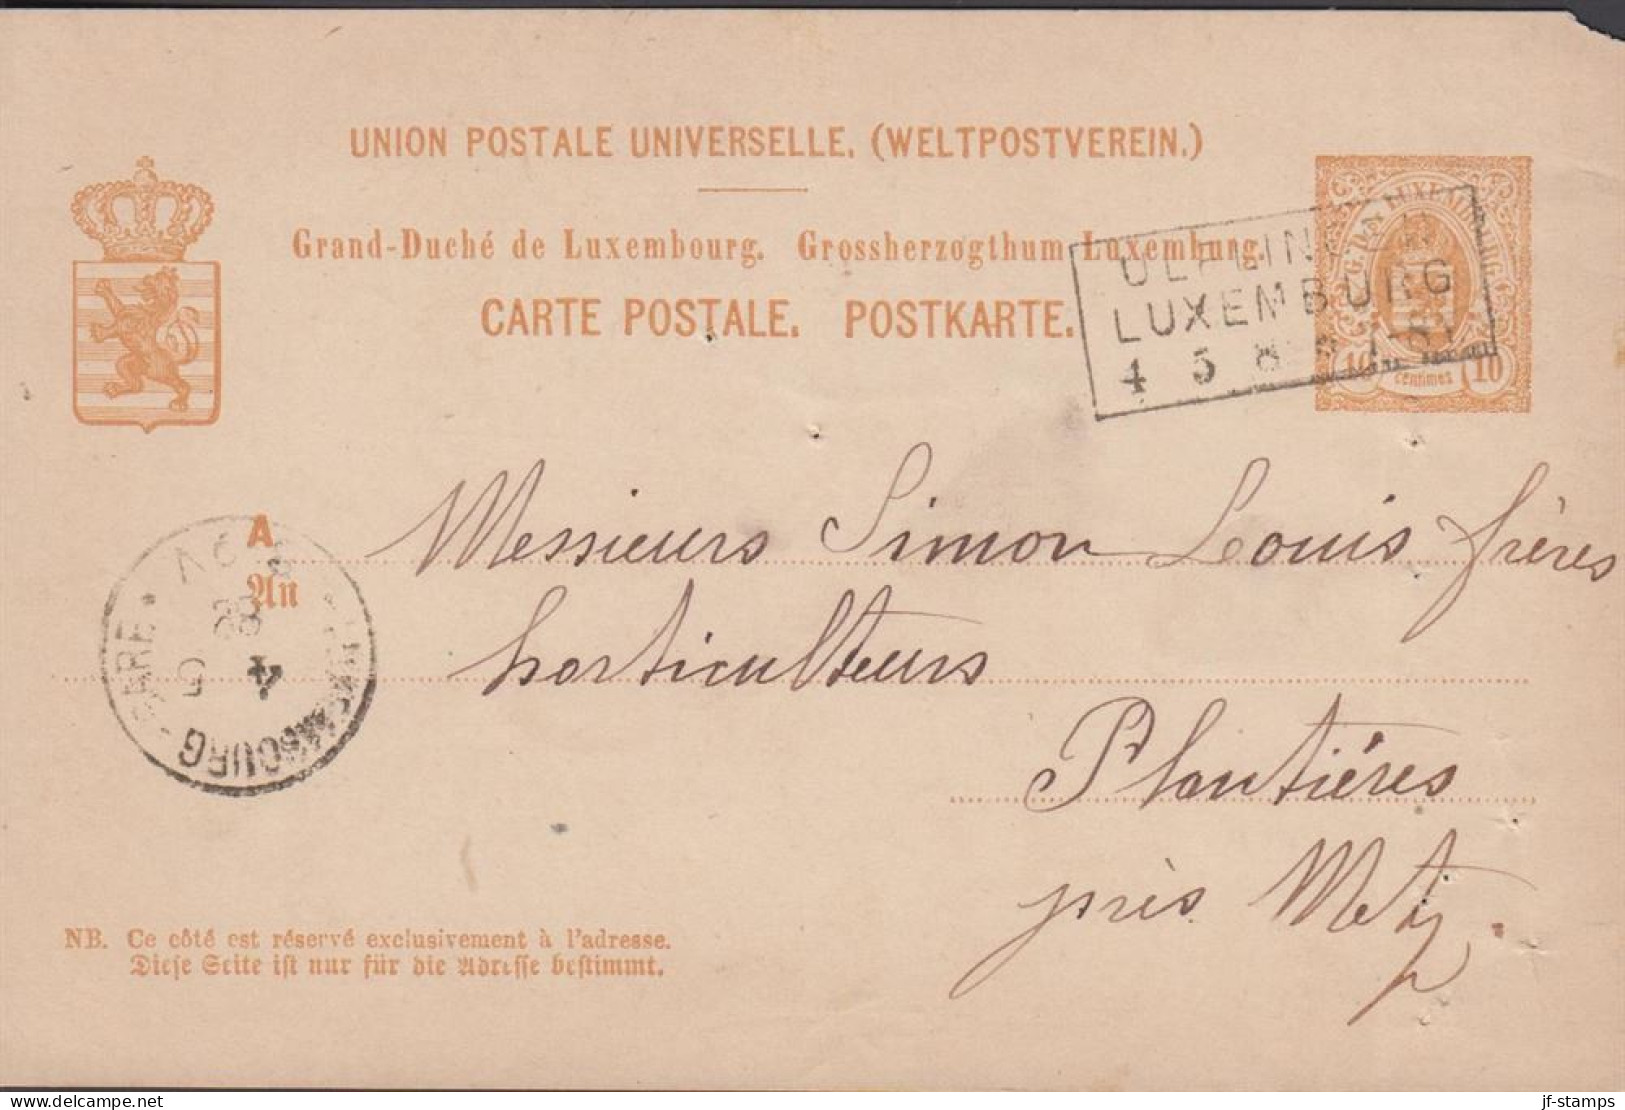 1888. LUXEMBOURG. 10 CENTIMES CARTE POSTALE Cancelled With Box-cancel ULFLINGEN LUXEMBURG 4 5 88. Nedle Ho... - JF445176 - Entiers Postaux